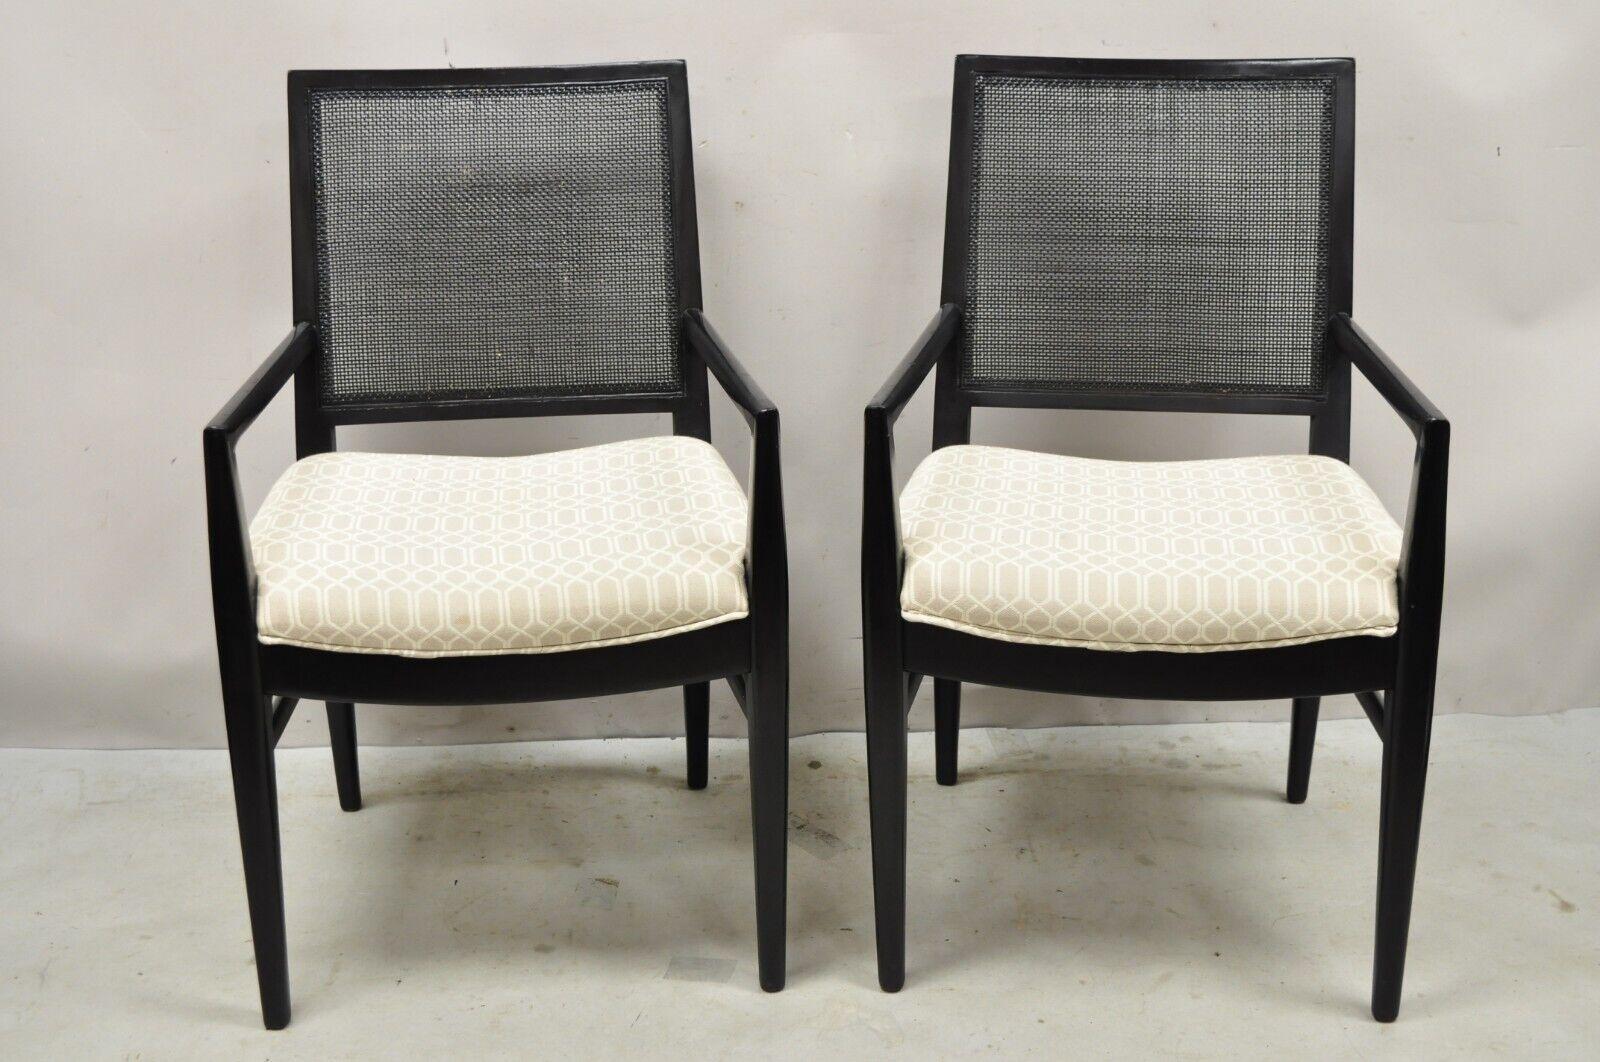 Vintage Mid Century Modern Paul McCobb Style Black Cane Dining Chairs - Set of 6 5